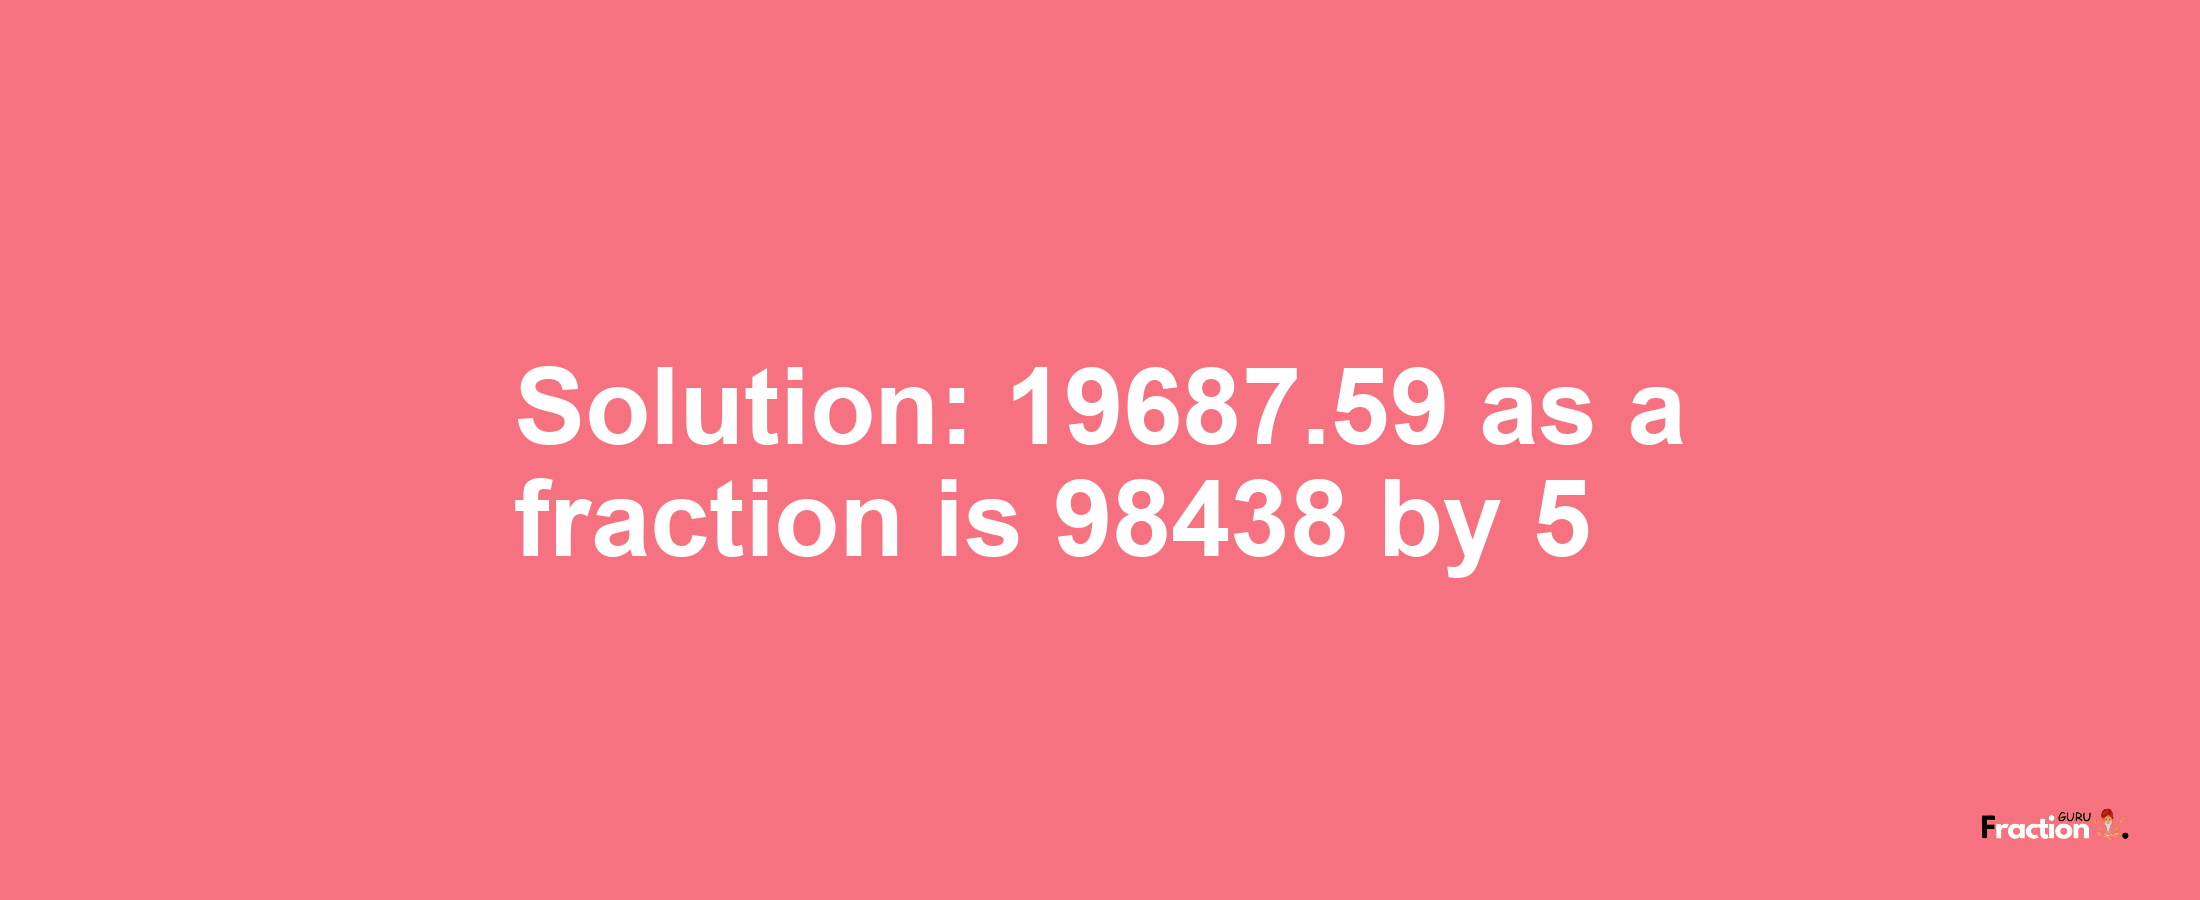 Solution:19687.59 as a fraction is 98438/5